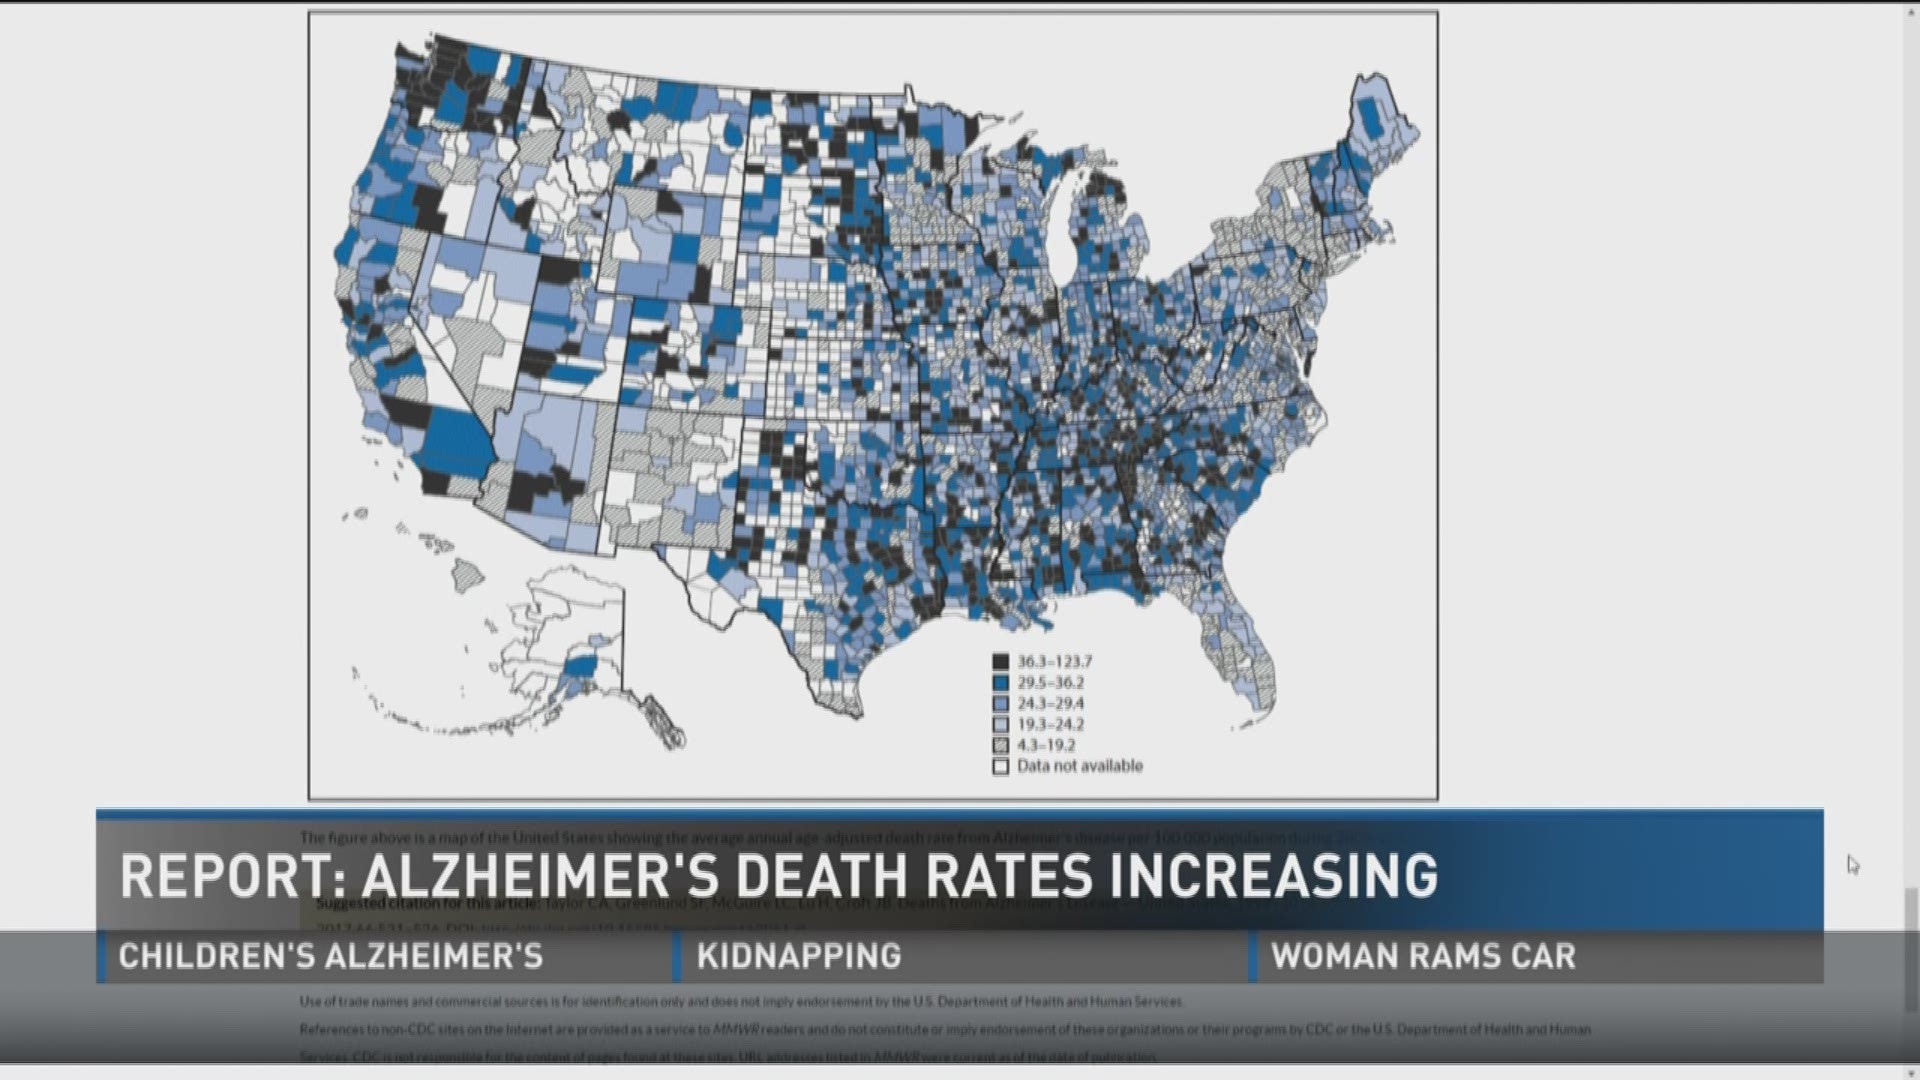 Doctor Monica Crane shares the reasons for the increase in Alzheimer's death rates. She also mentions how it's had a huge impact in East Tennessee.